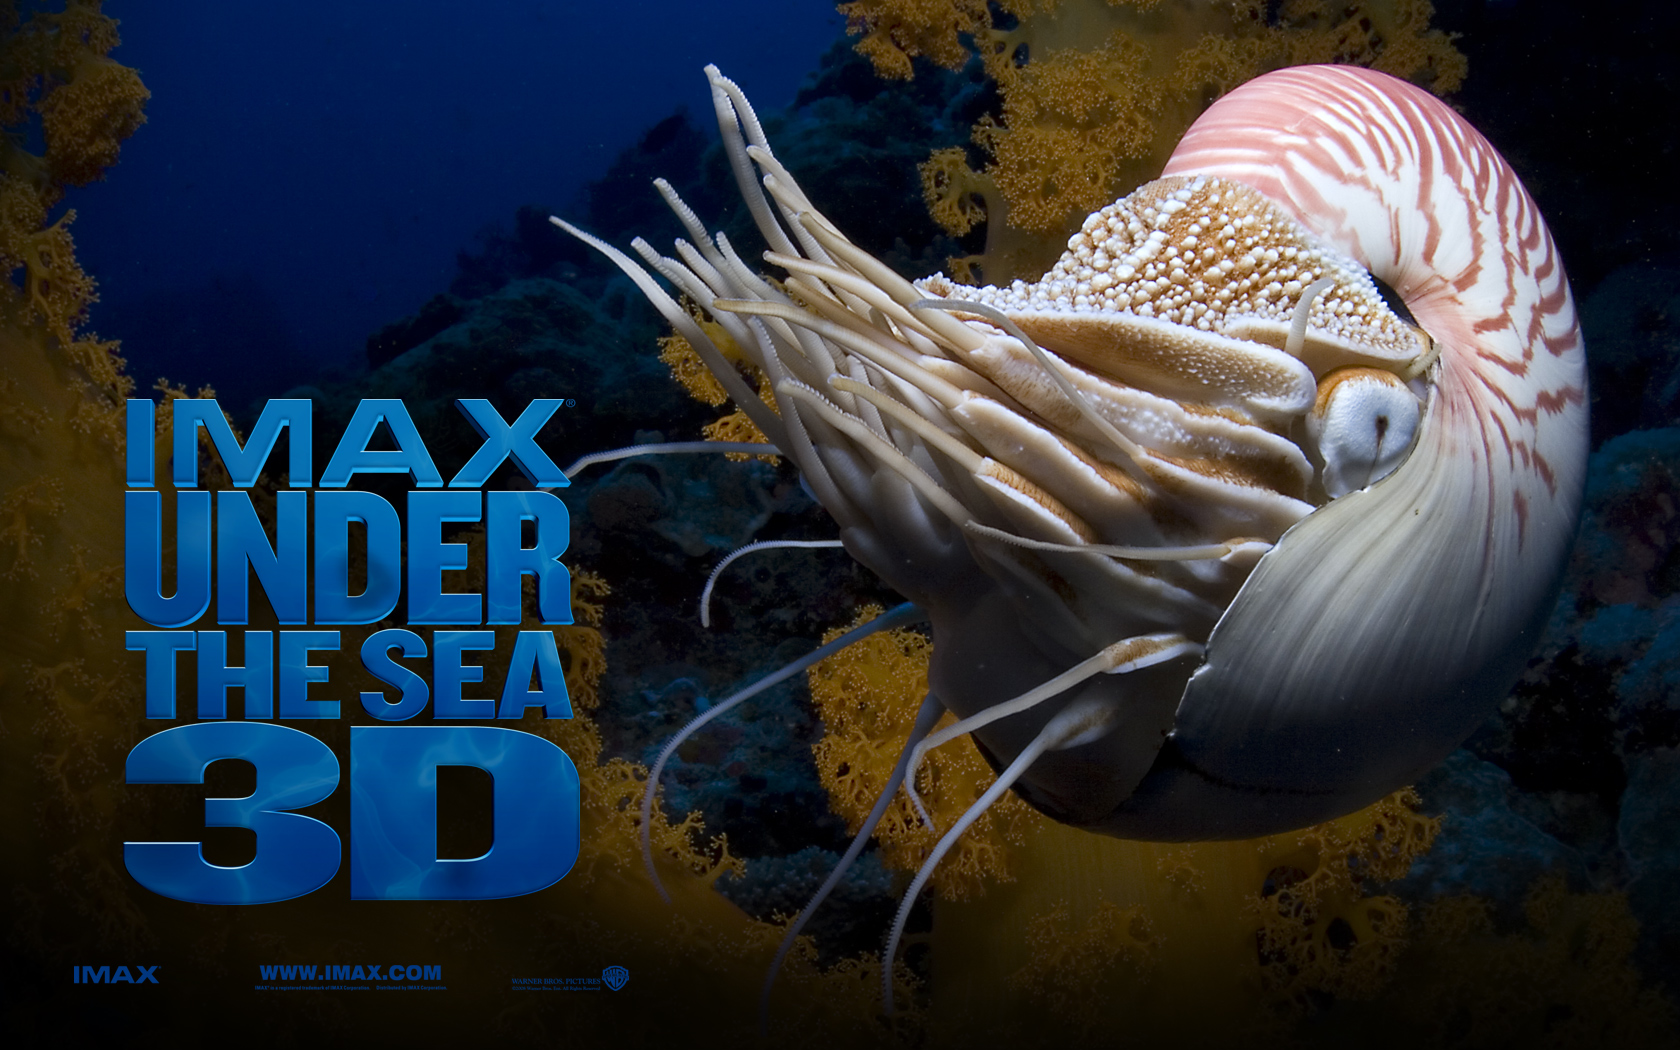 Under The Sea 3d Wallpaper 2 - Sea Creature With Tentacles And Shell - HD Wallpaper 